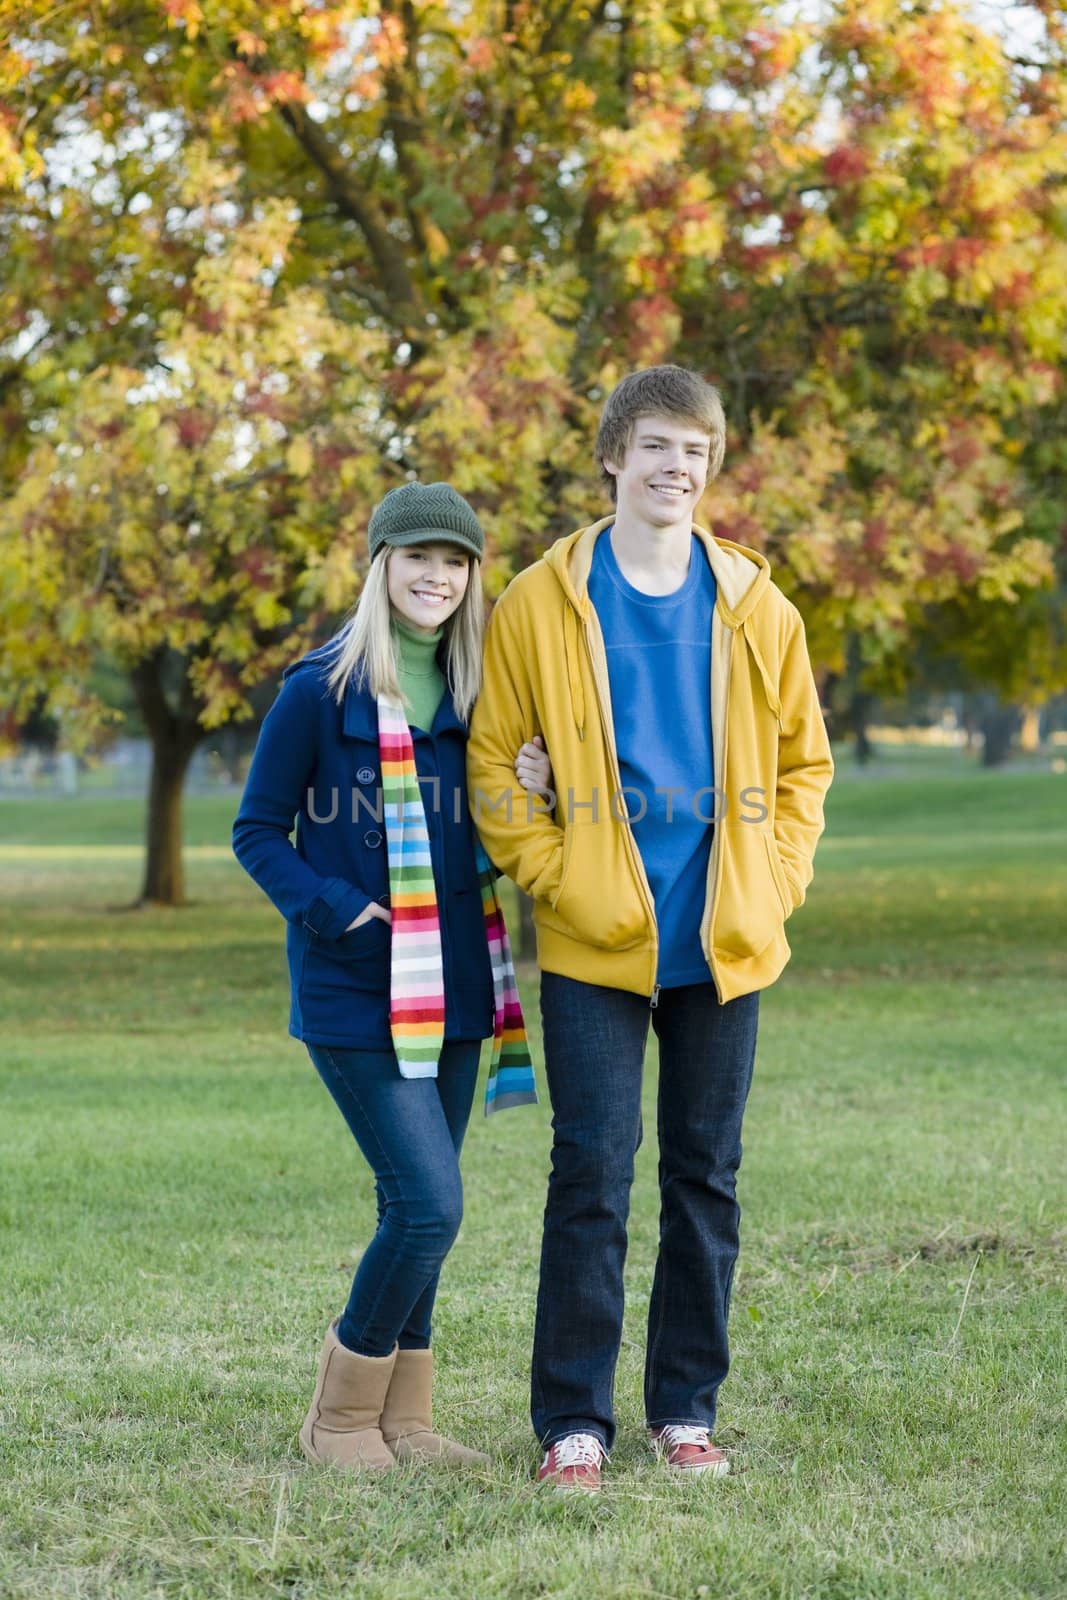 Portrait of a Brother and Sister Standing Together in a Park